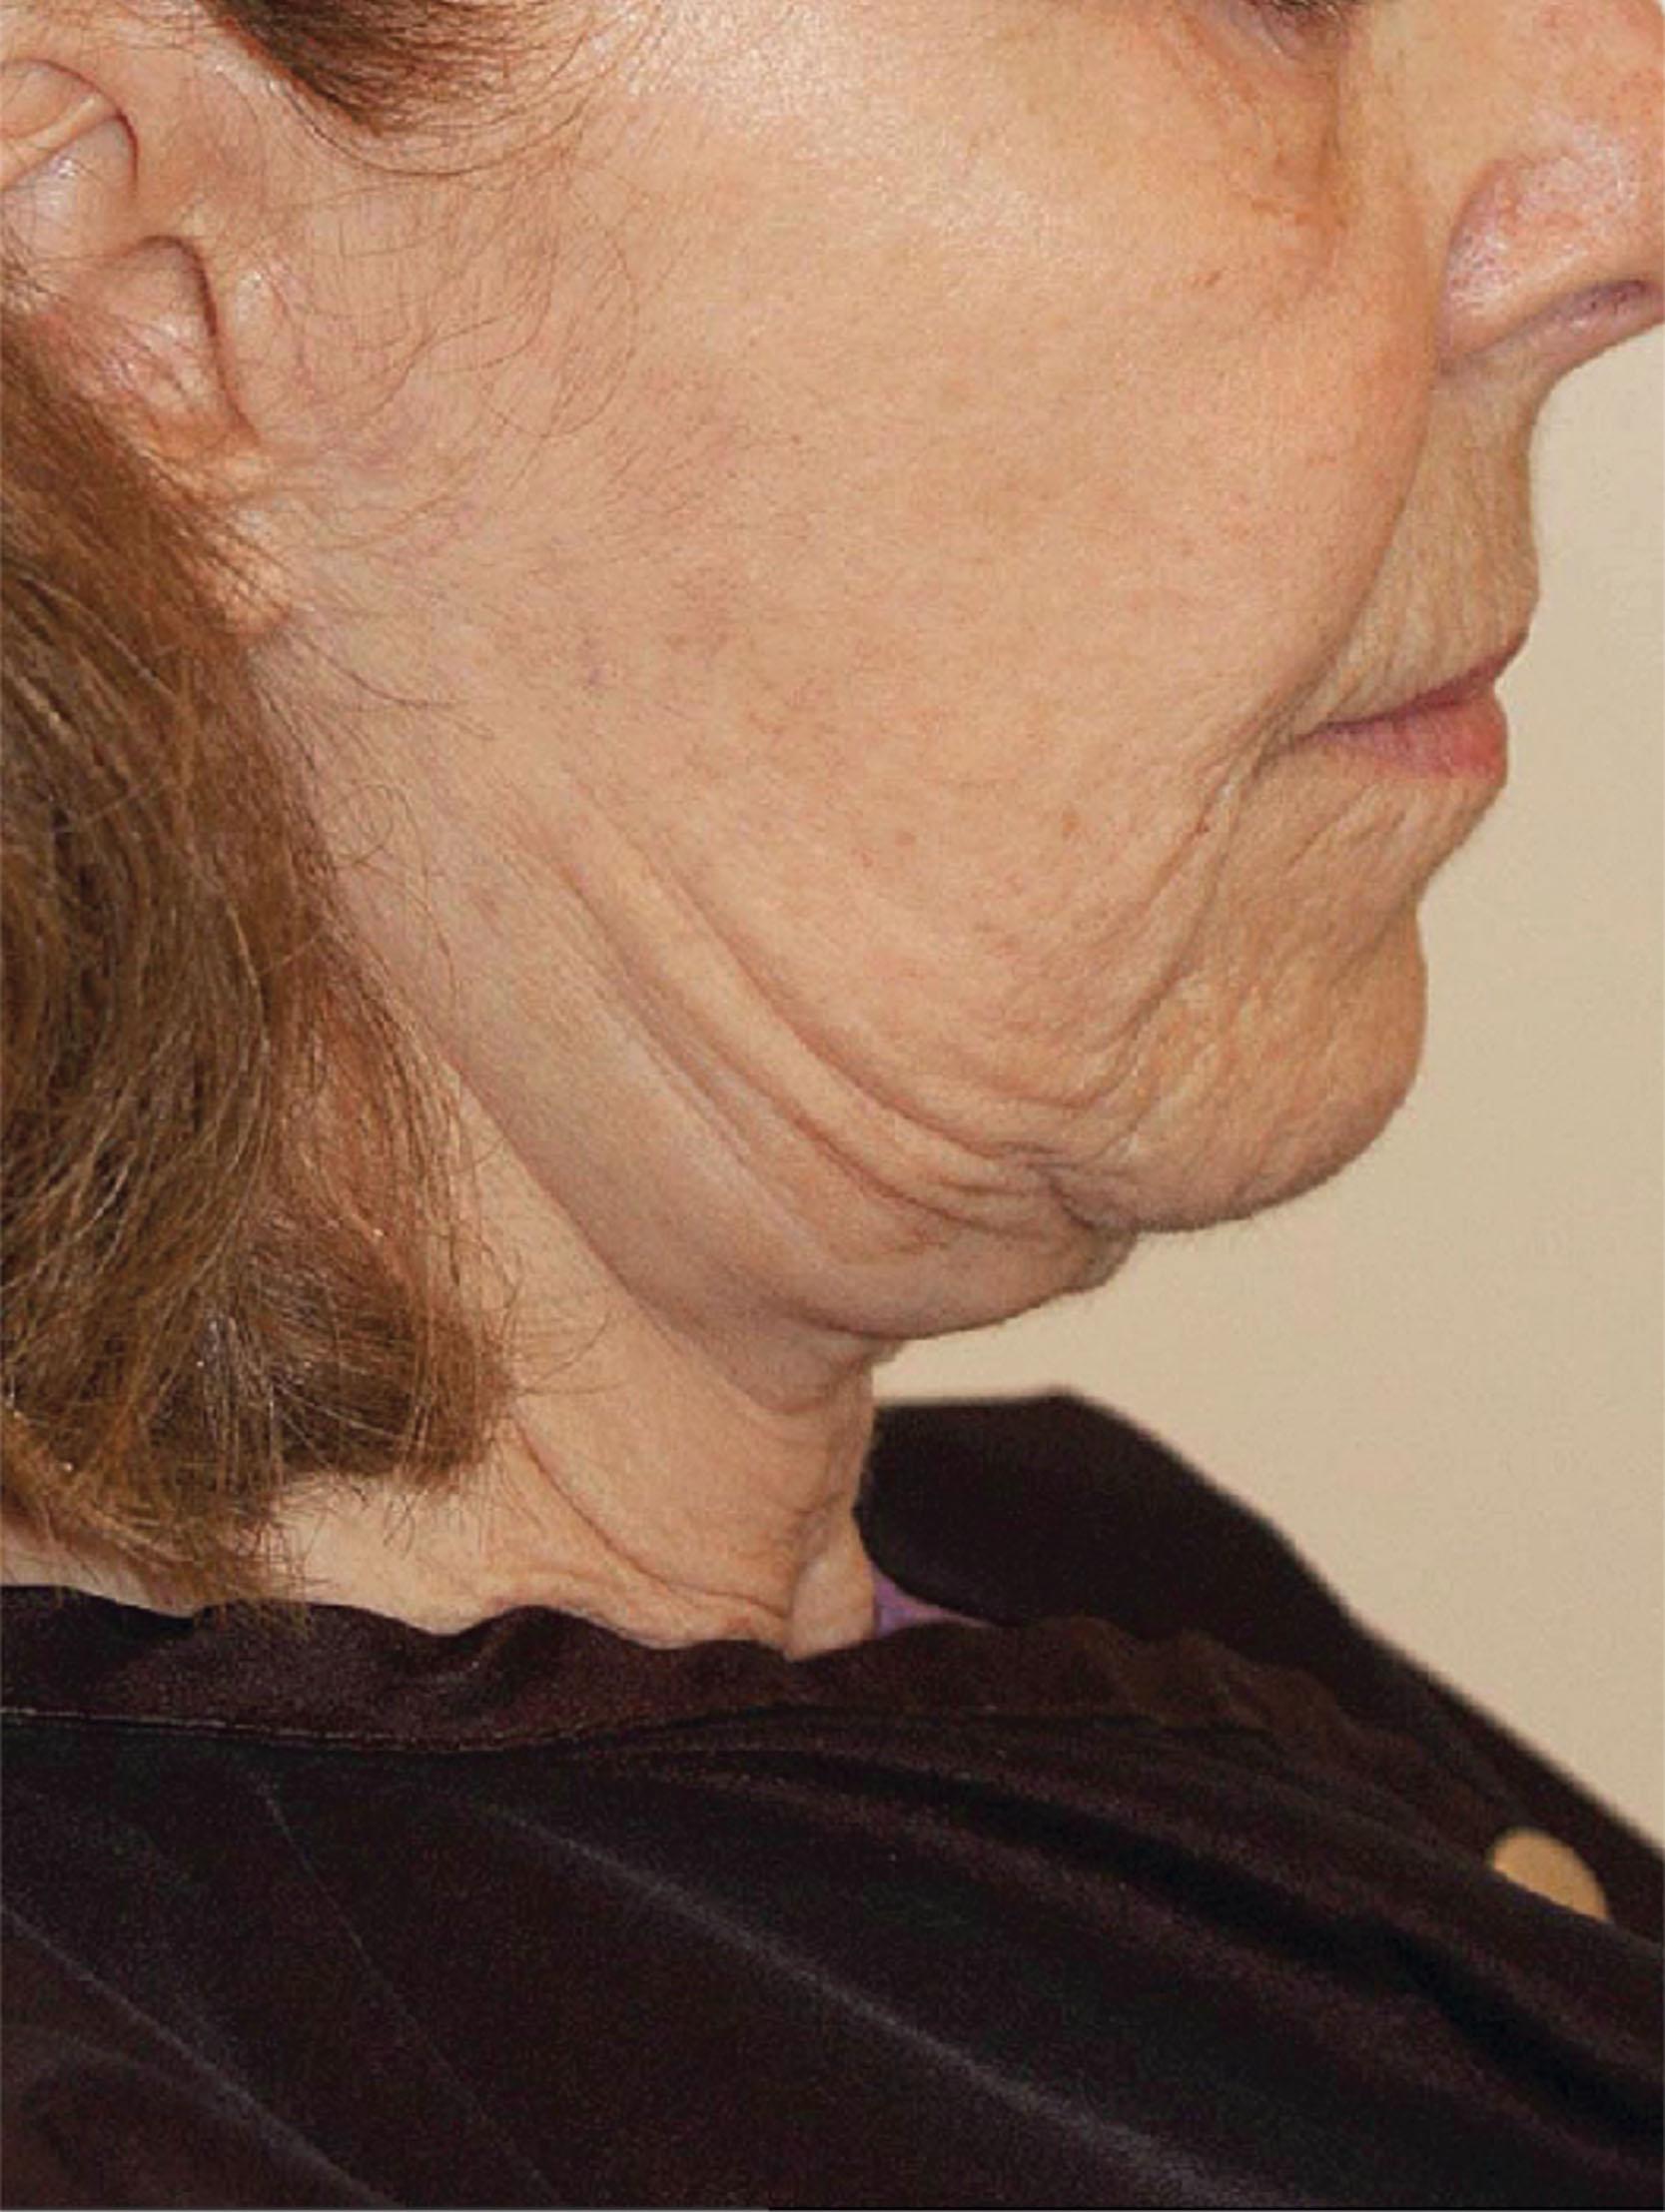 Figure 9.8.4, Lateral sweep. Traditional “skin-only” facelifts and “low SMAS” procedures typically result in over-tightening of the pre-auricular cheek skin and provide little support of the lateral perioral and jowl areas. In time, these unsupported tissues continued to descend in a disproportionate fashion while the lateral face remained tight, resulting in a characteristic and objectionable “swept up” appearance of the skin over the jawline often referred to as “lateral sweep”. (Procedure performed by an unknown surgeon.)